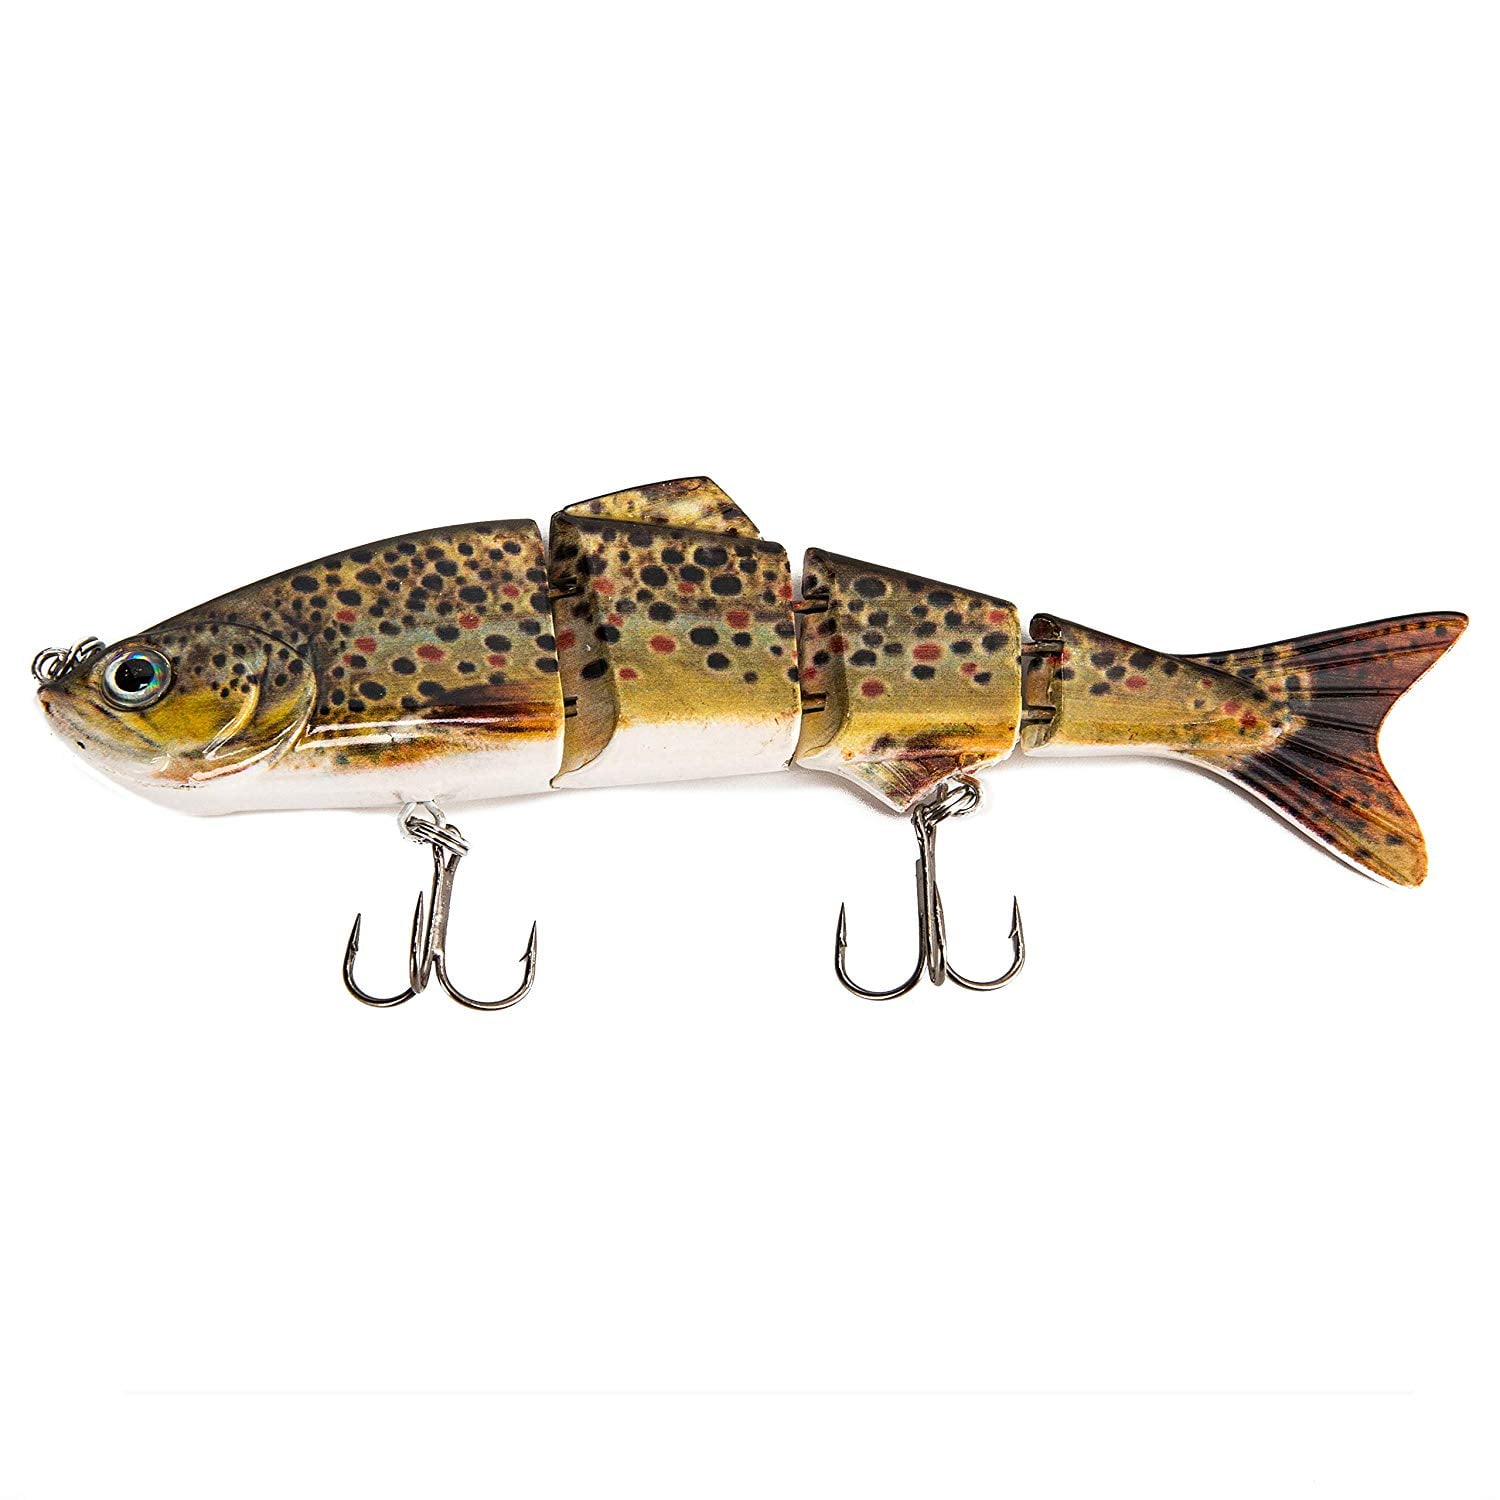 A-04 Crankbait Sea Perch Salmon Pike Trout Spinners Fishing Lures Tackle Hook UK 